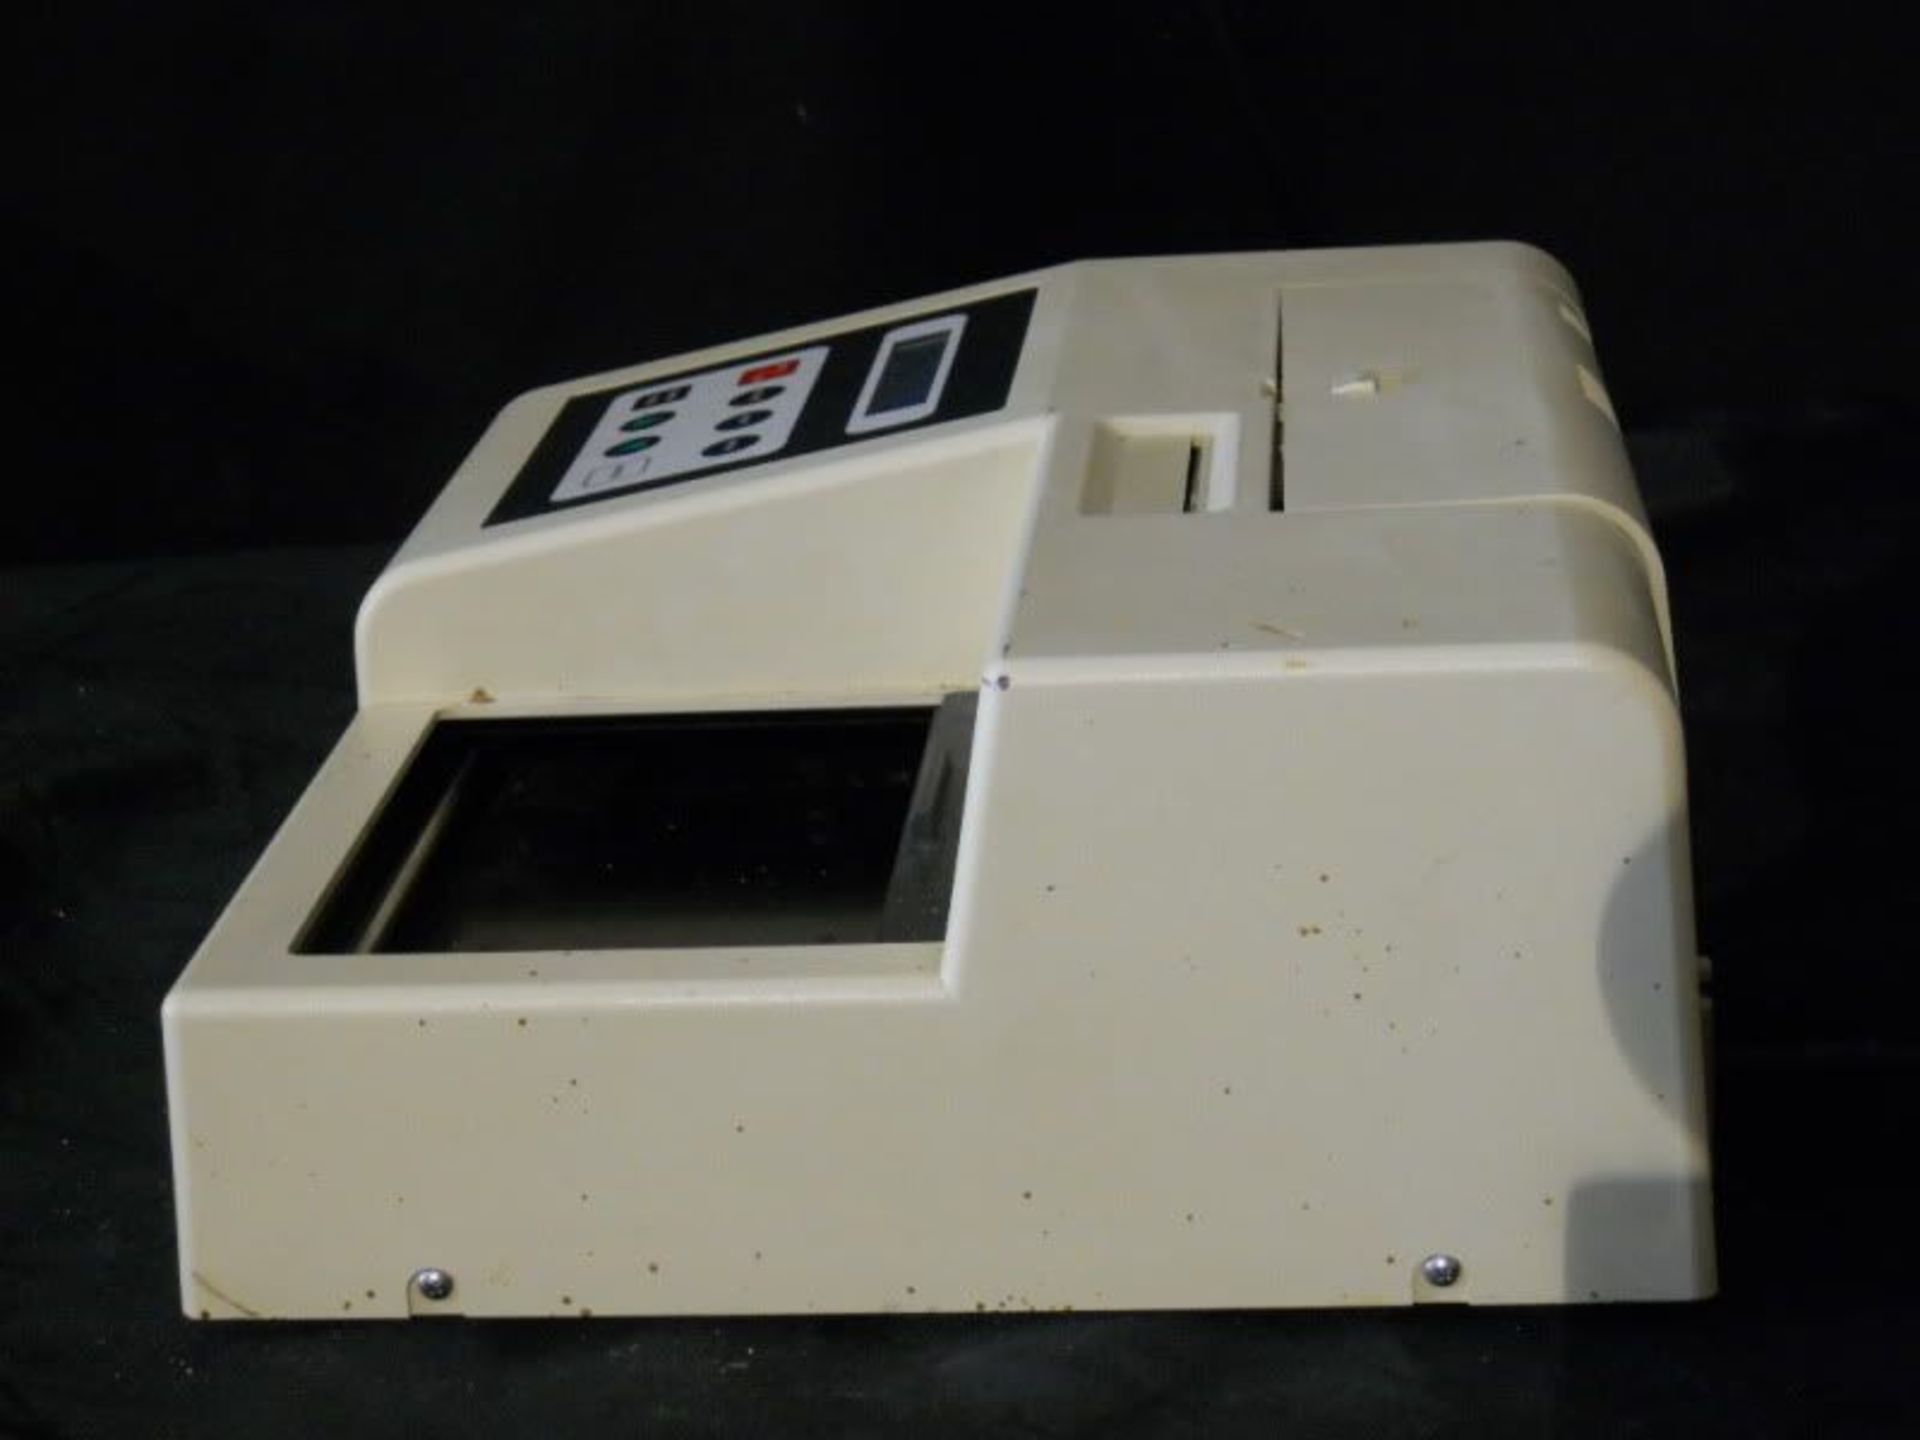 Bio Rad Microplate Reader Model 550 (Parts), Qty 1, 330812933938 - Image 10 of 10